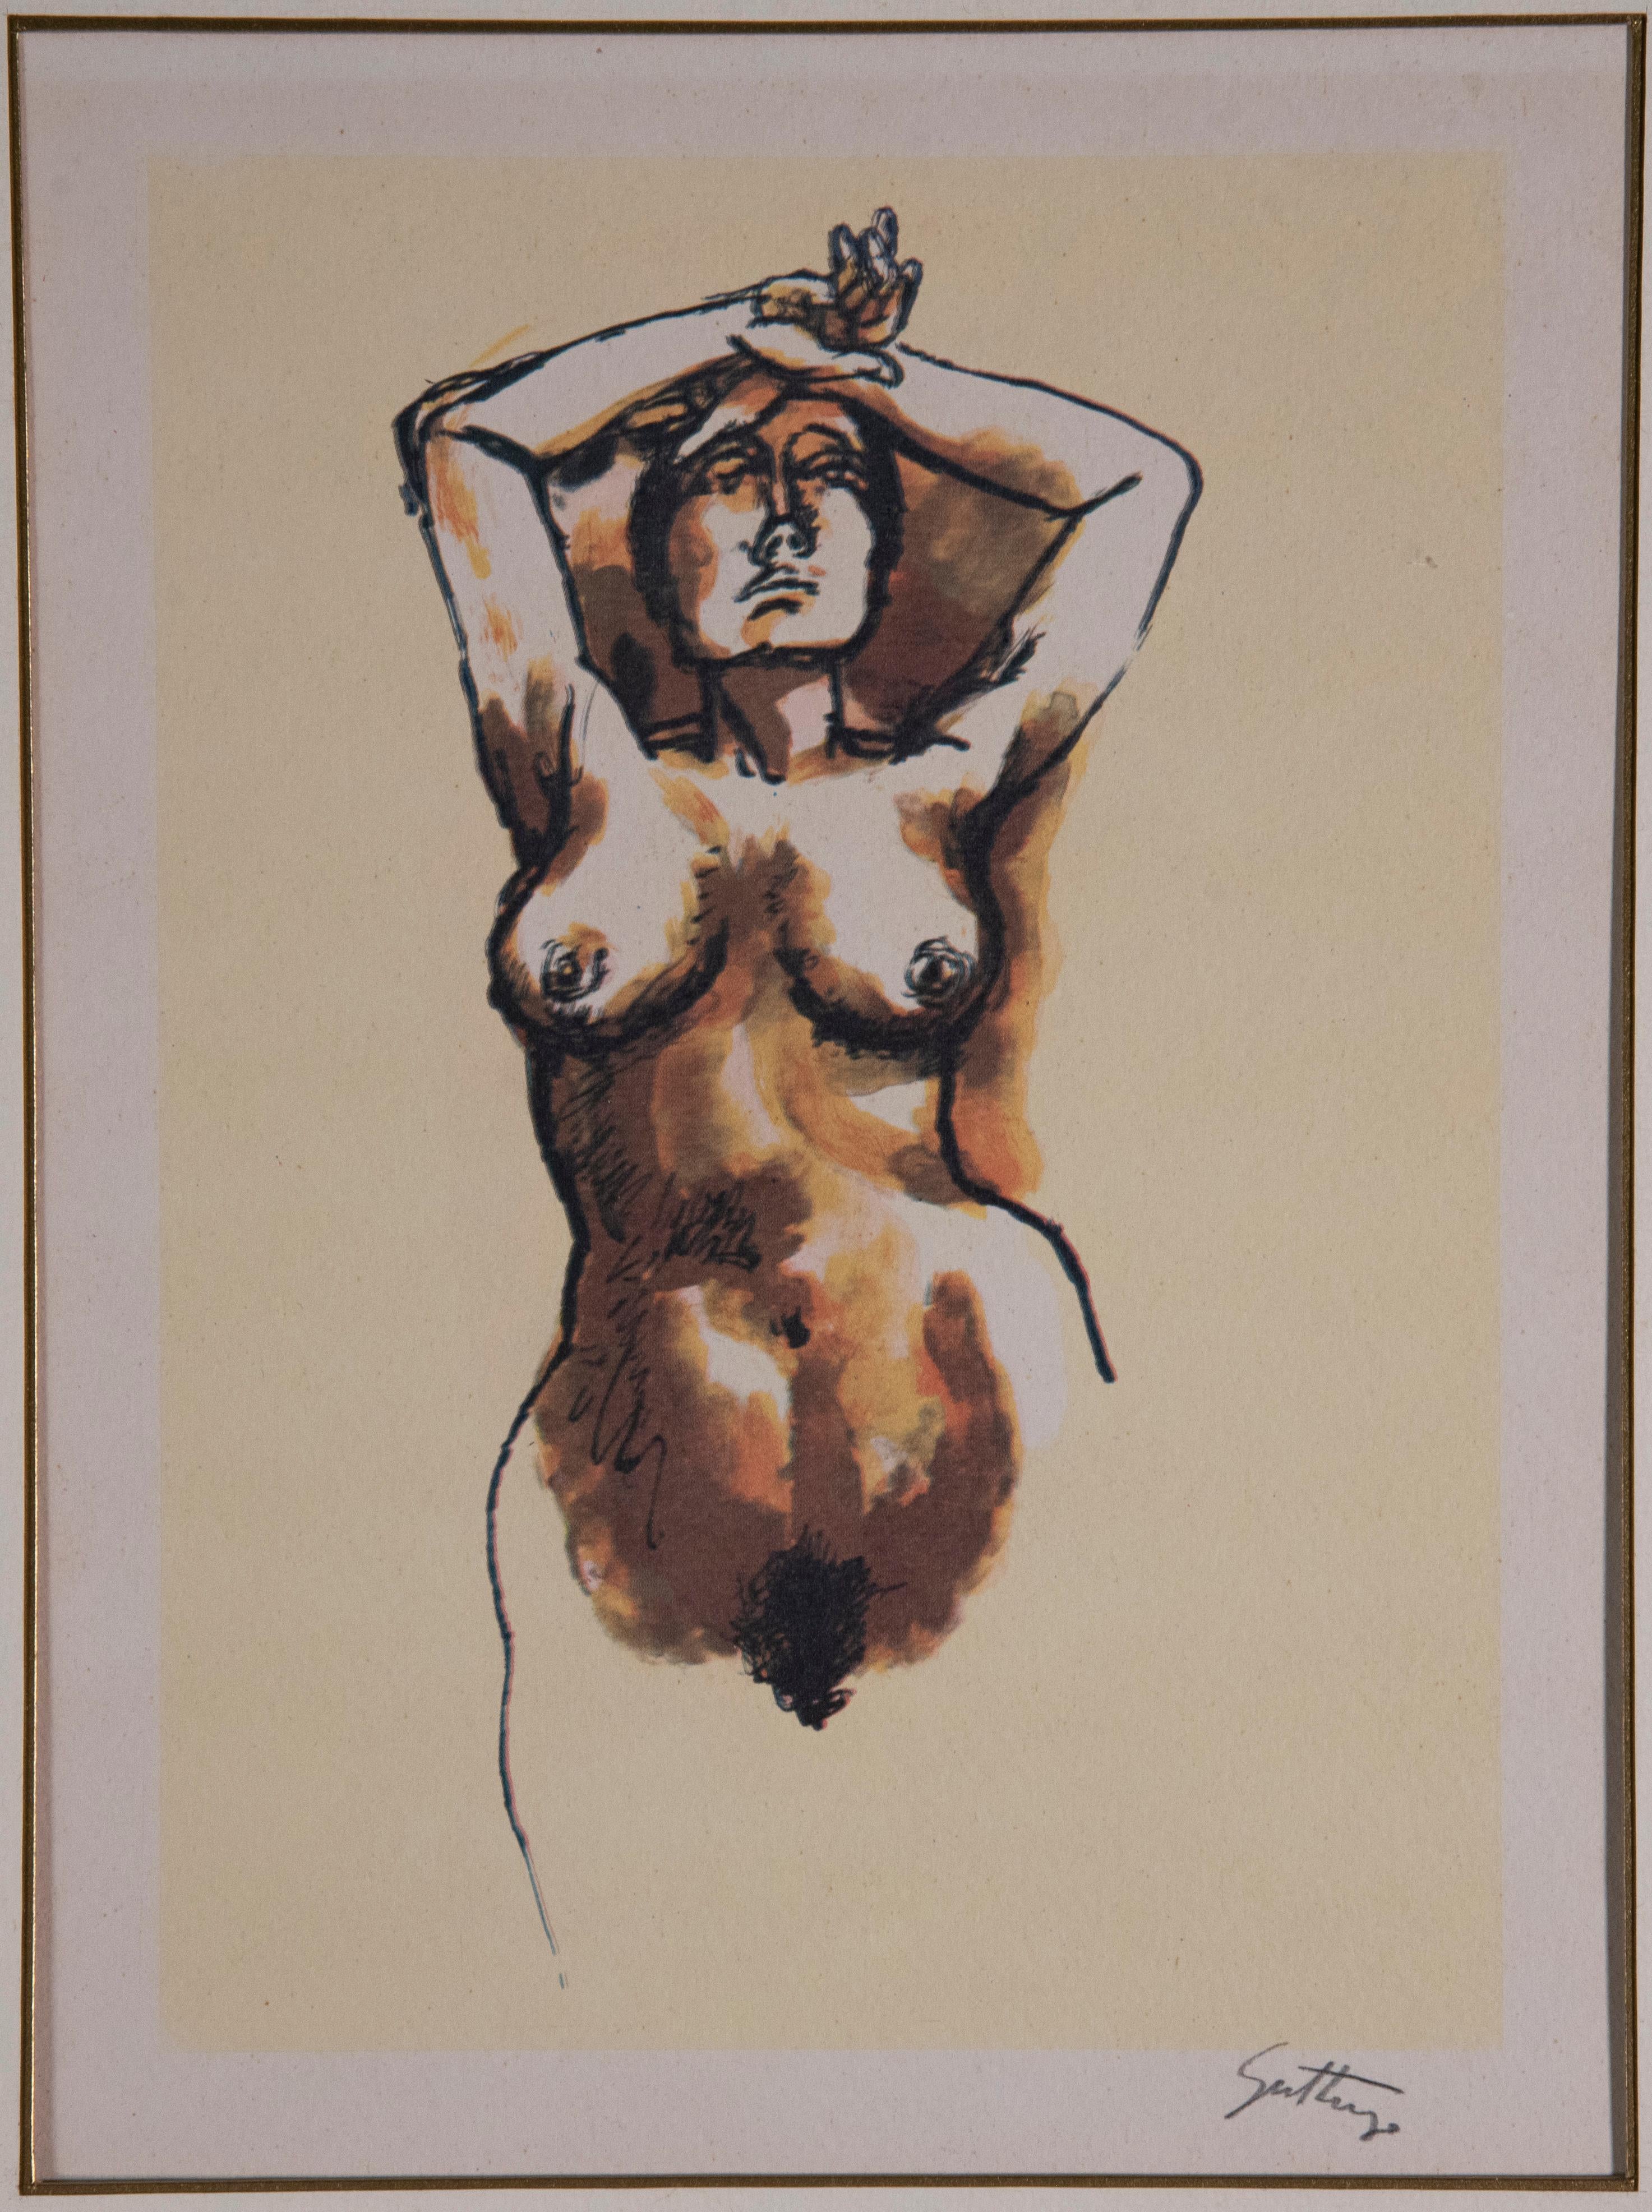 Woman “Nude” figurative etching by Renato Guttuso.
Very important Italian artist.
Signed on the lower right.
This etching, never before on the market, comes from a private collection and is beautified by an very nice original framein almost perfect